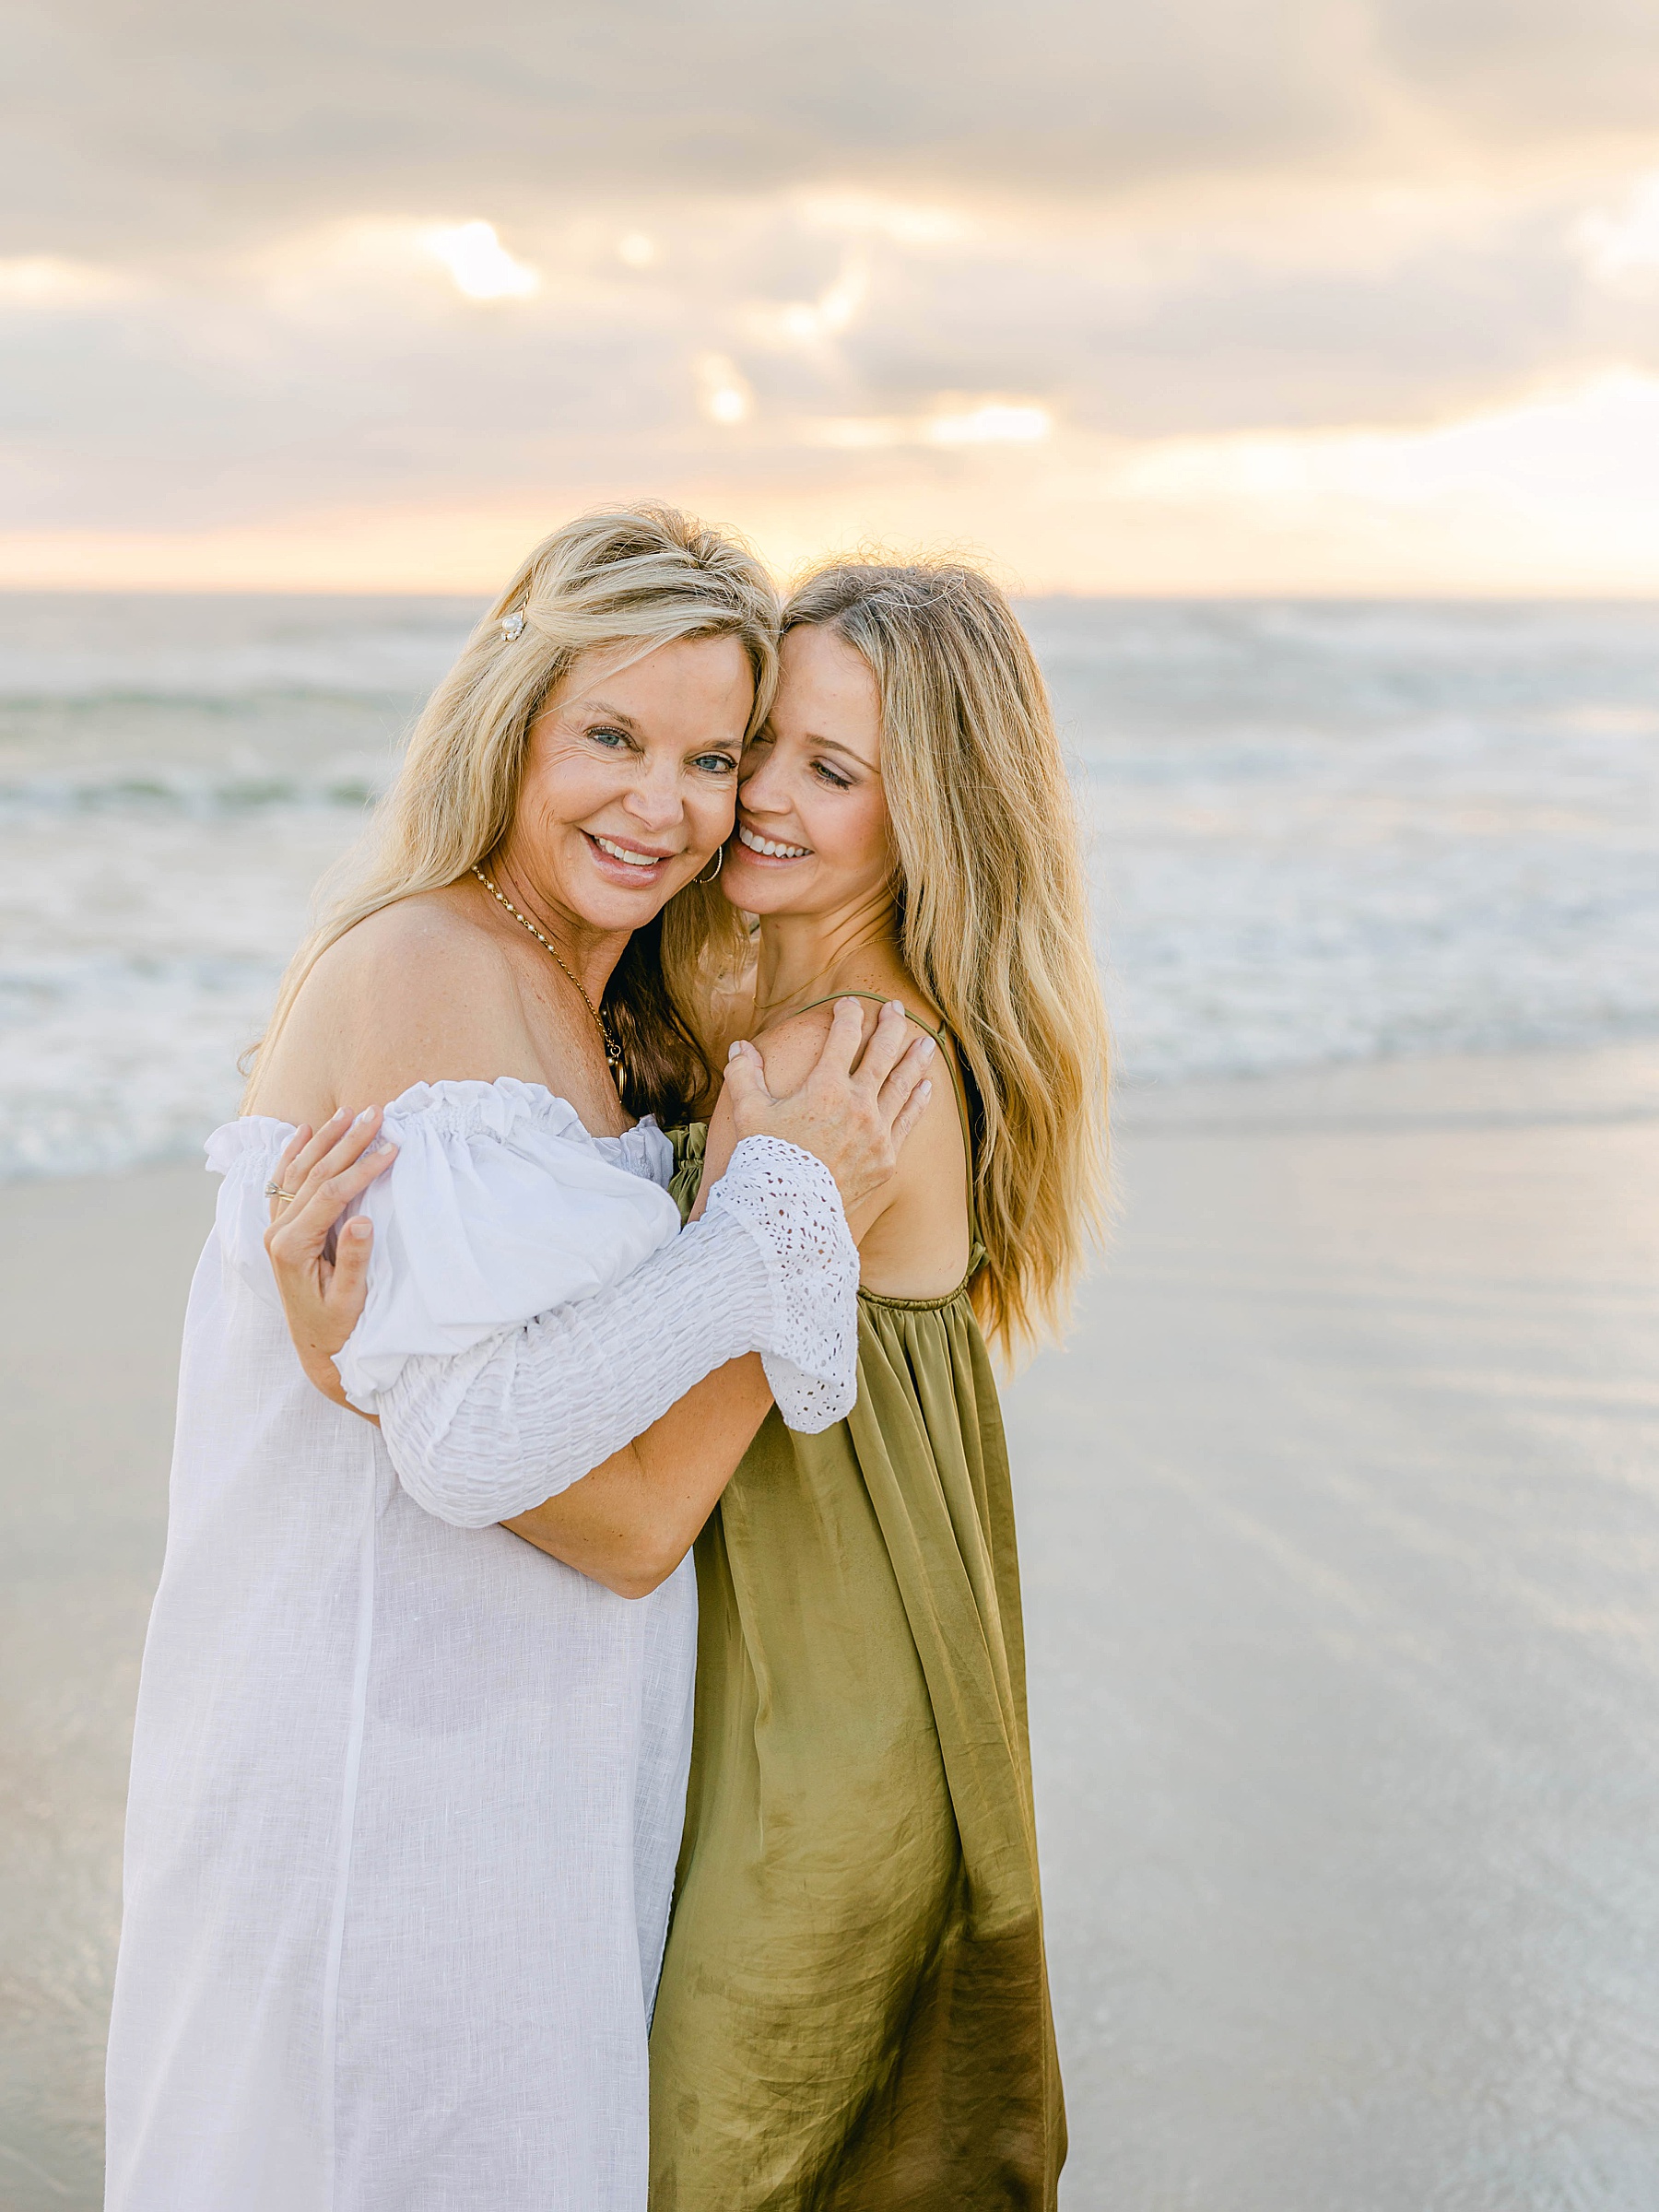 women hugging beach in the water at sunrise on the beach